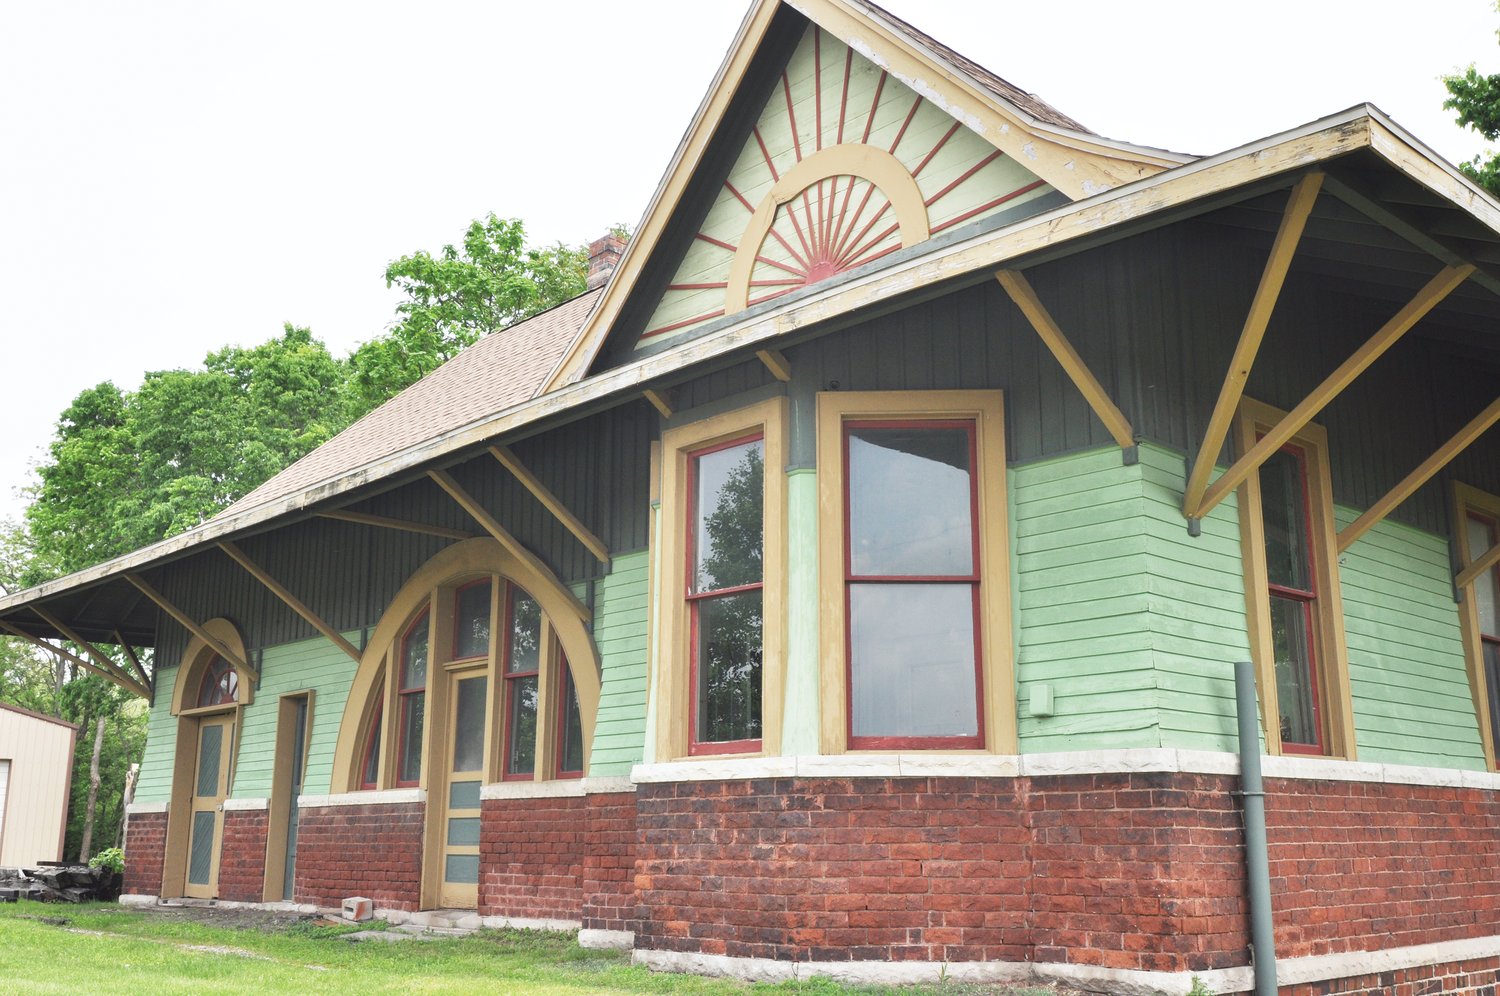 The Veedersburg Nickel Plate Depot, which closed in 1988, received an Indiana Landmark grant to help pay for a plan to rehab the depot into a small event venue.